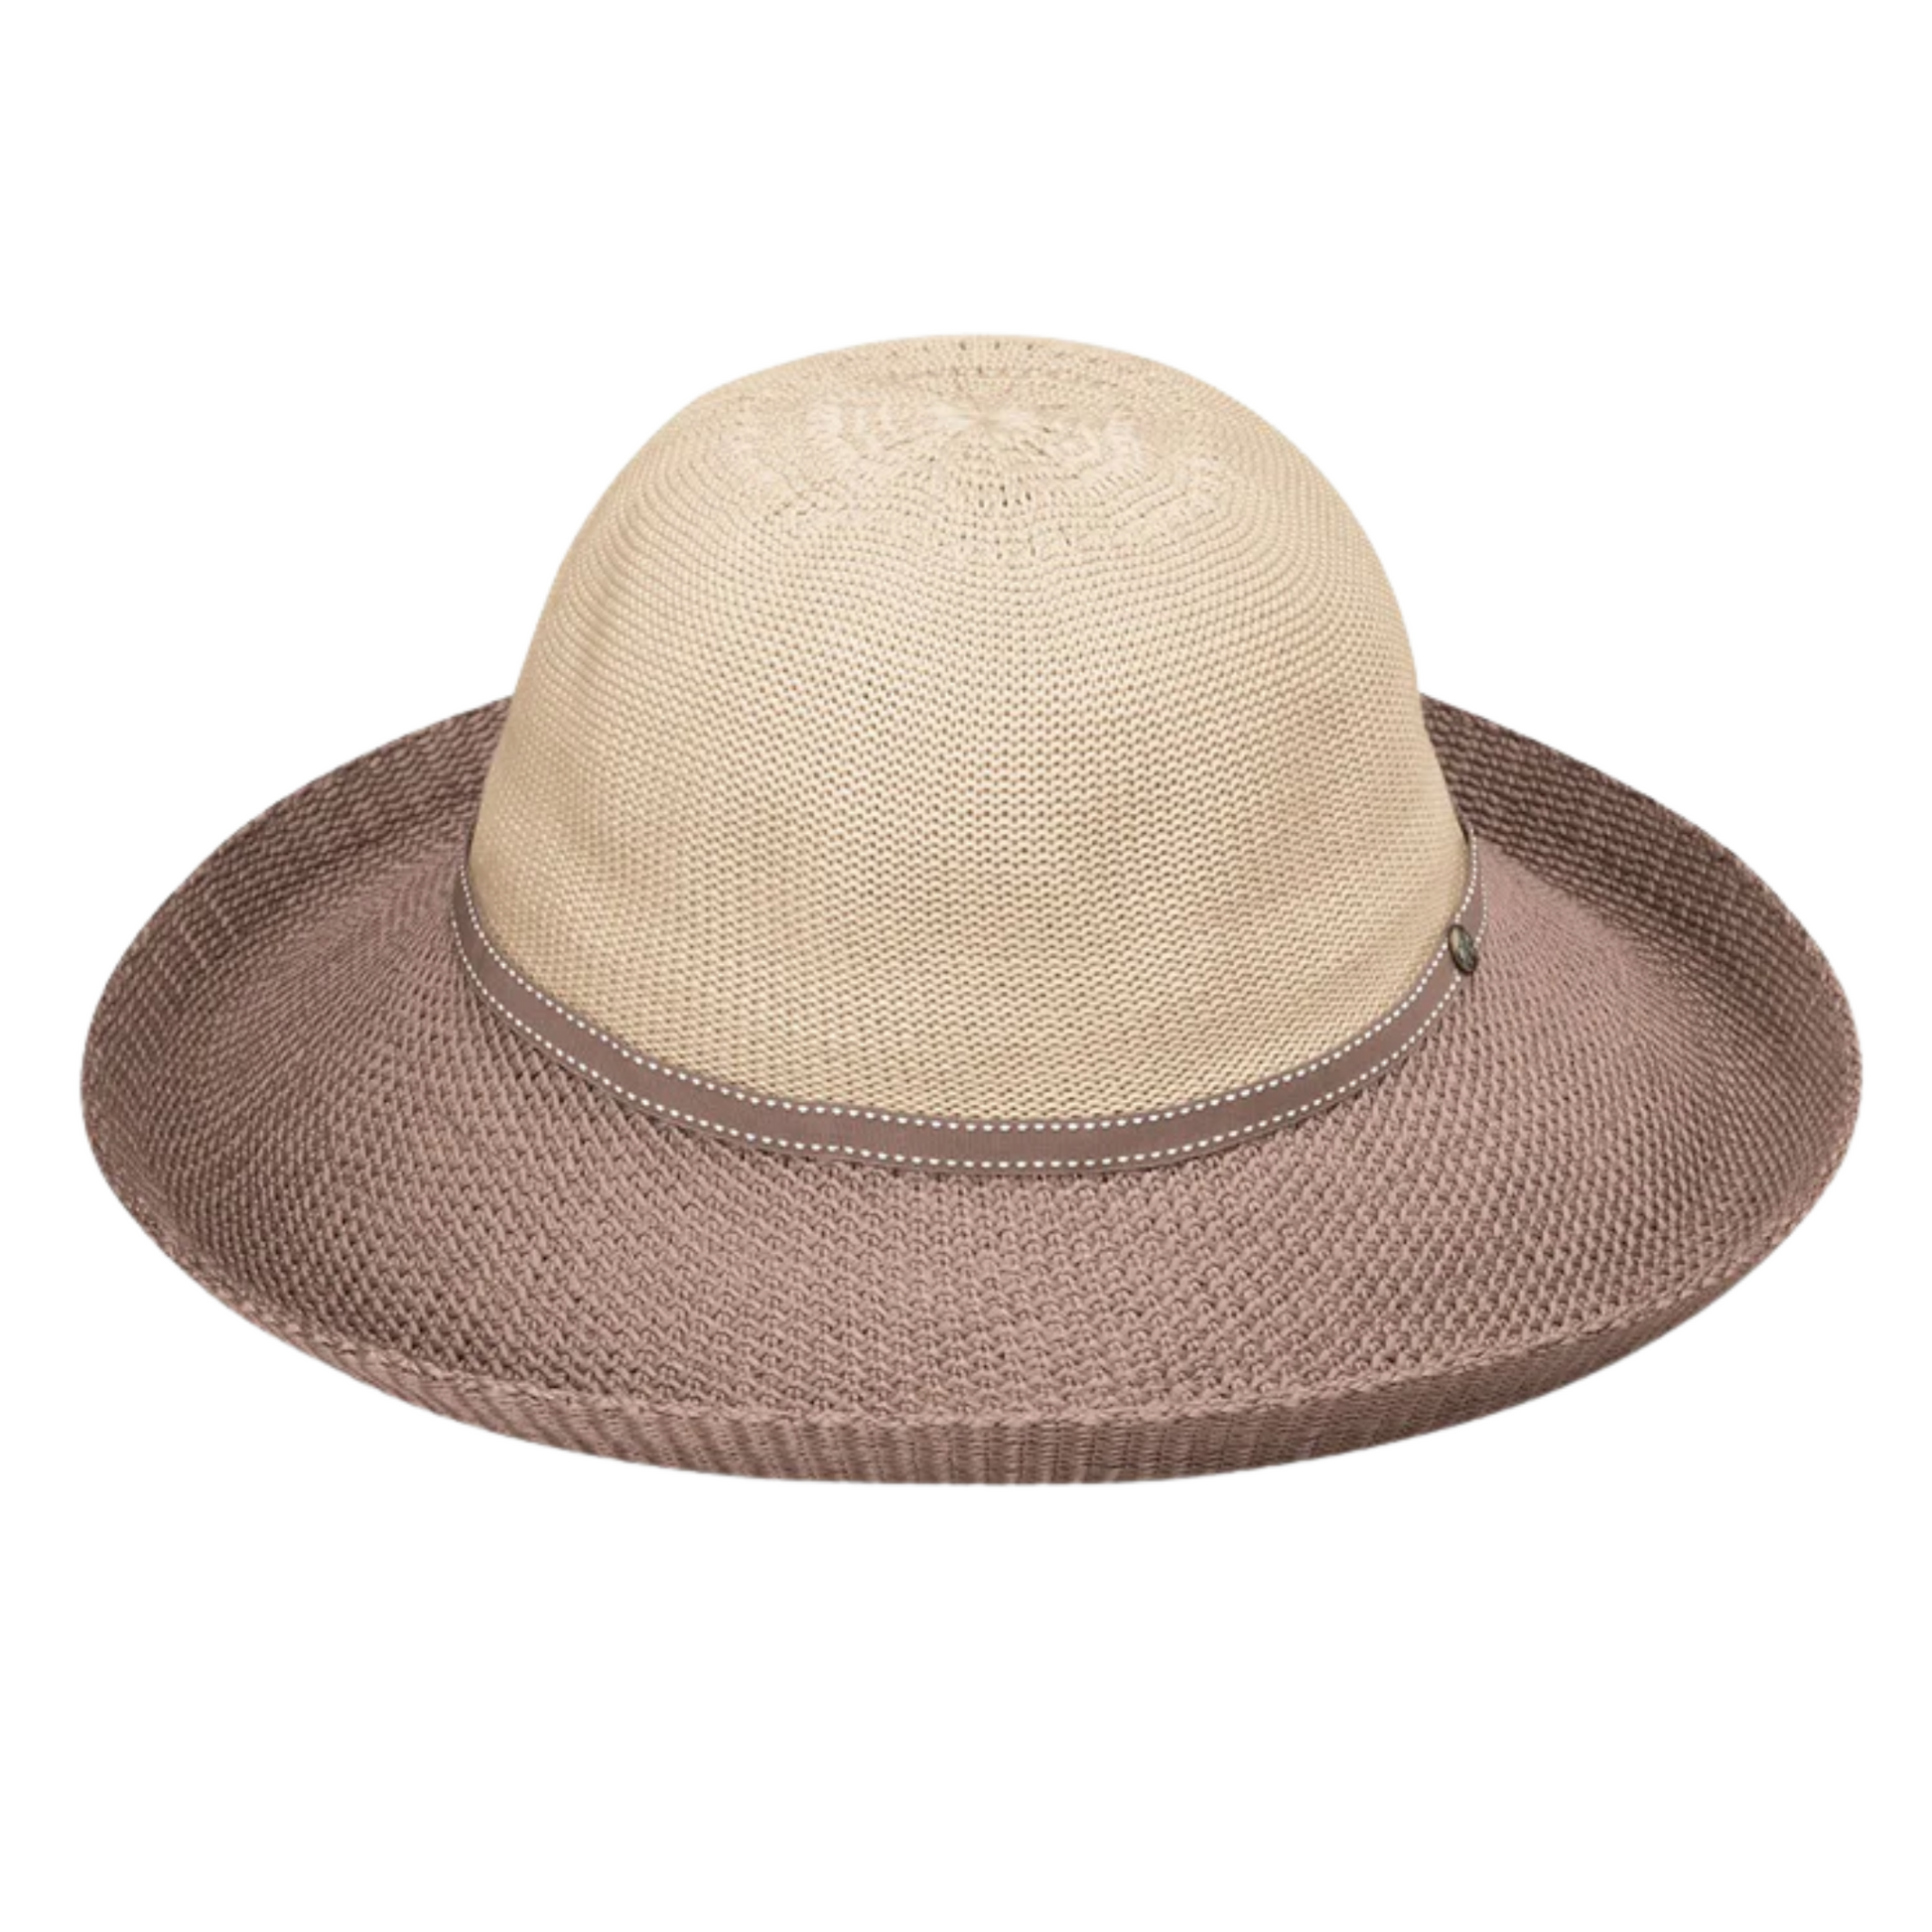 Two tone weaved hat pictured from the front. Features a light beige upper with light brown brim and brown contrast stitch band separating the brim from the head.